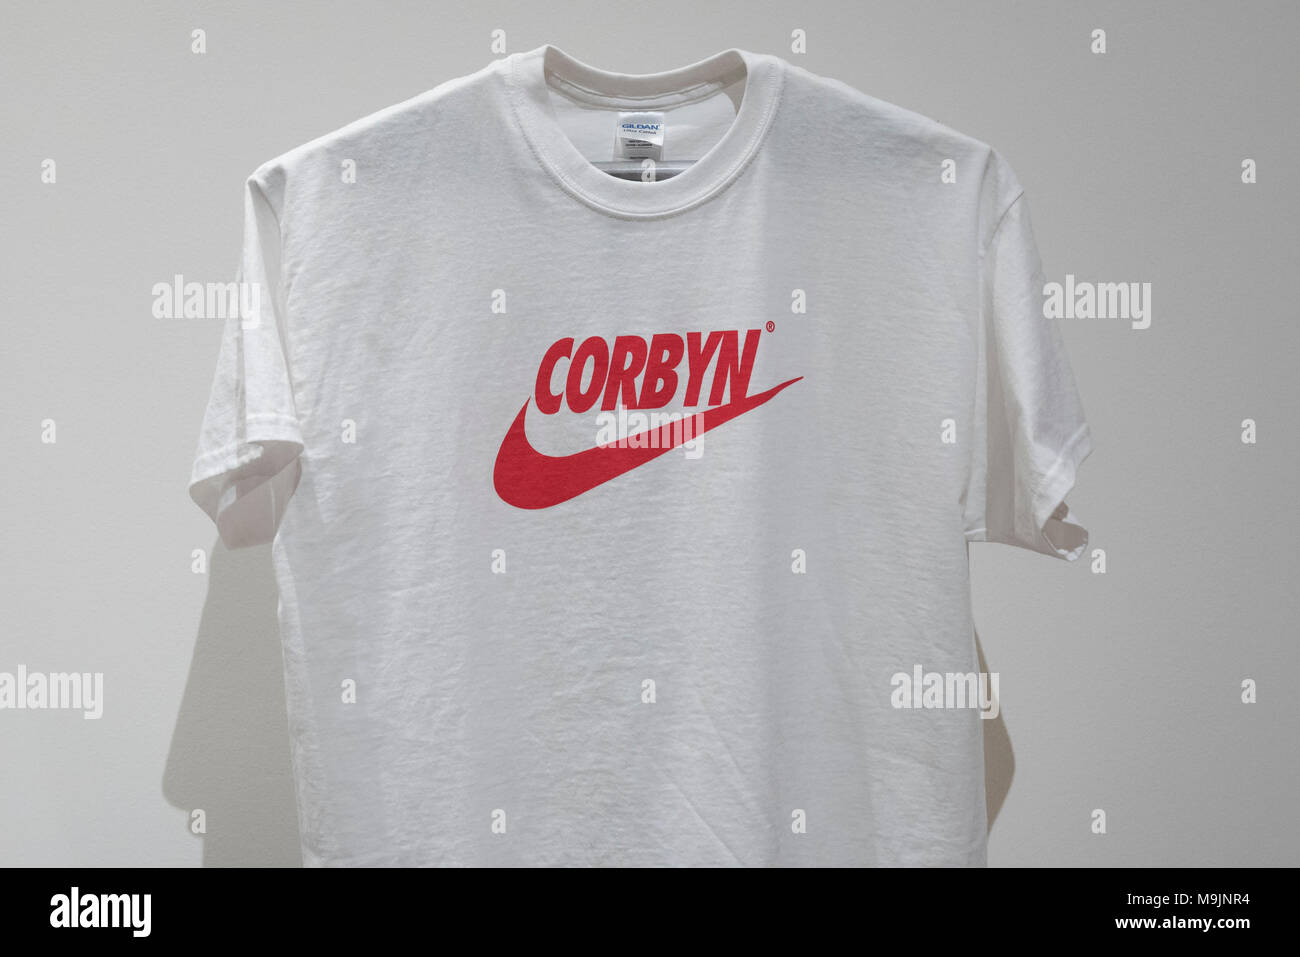 T Shirt Graphics High Resolution Stock Photography and Images - Alamy